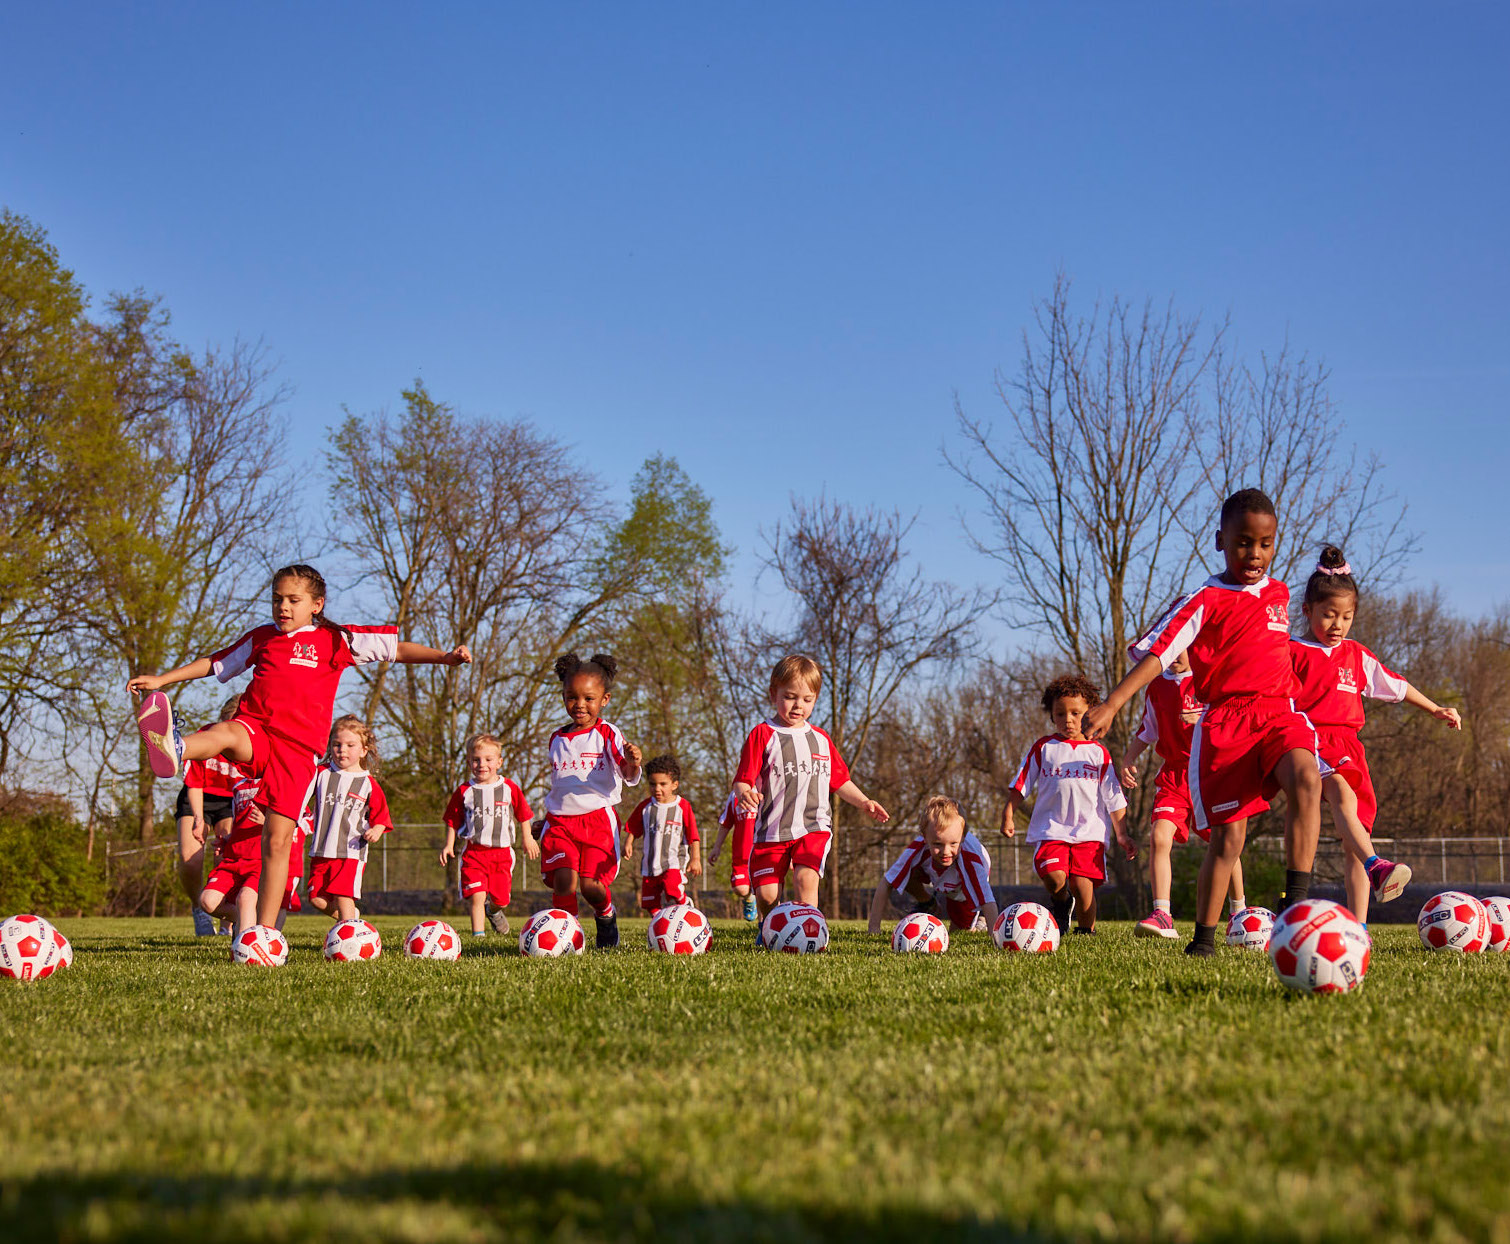 Little Kickers – Brighton & Hove – Hove Park After School. 2 FREE TRIALS AVAILABLE!